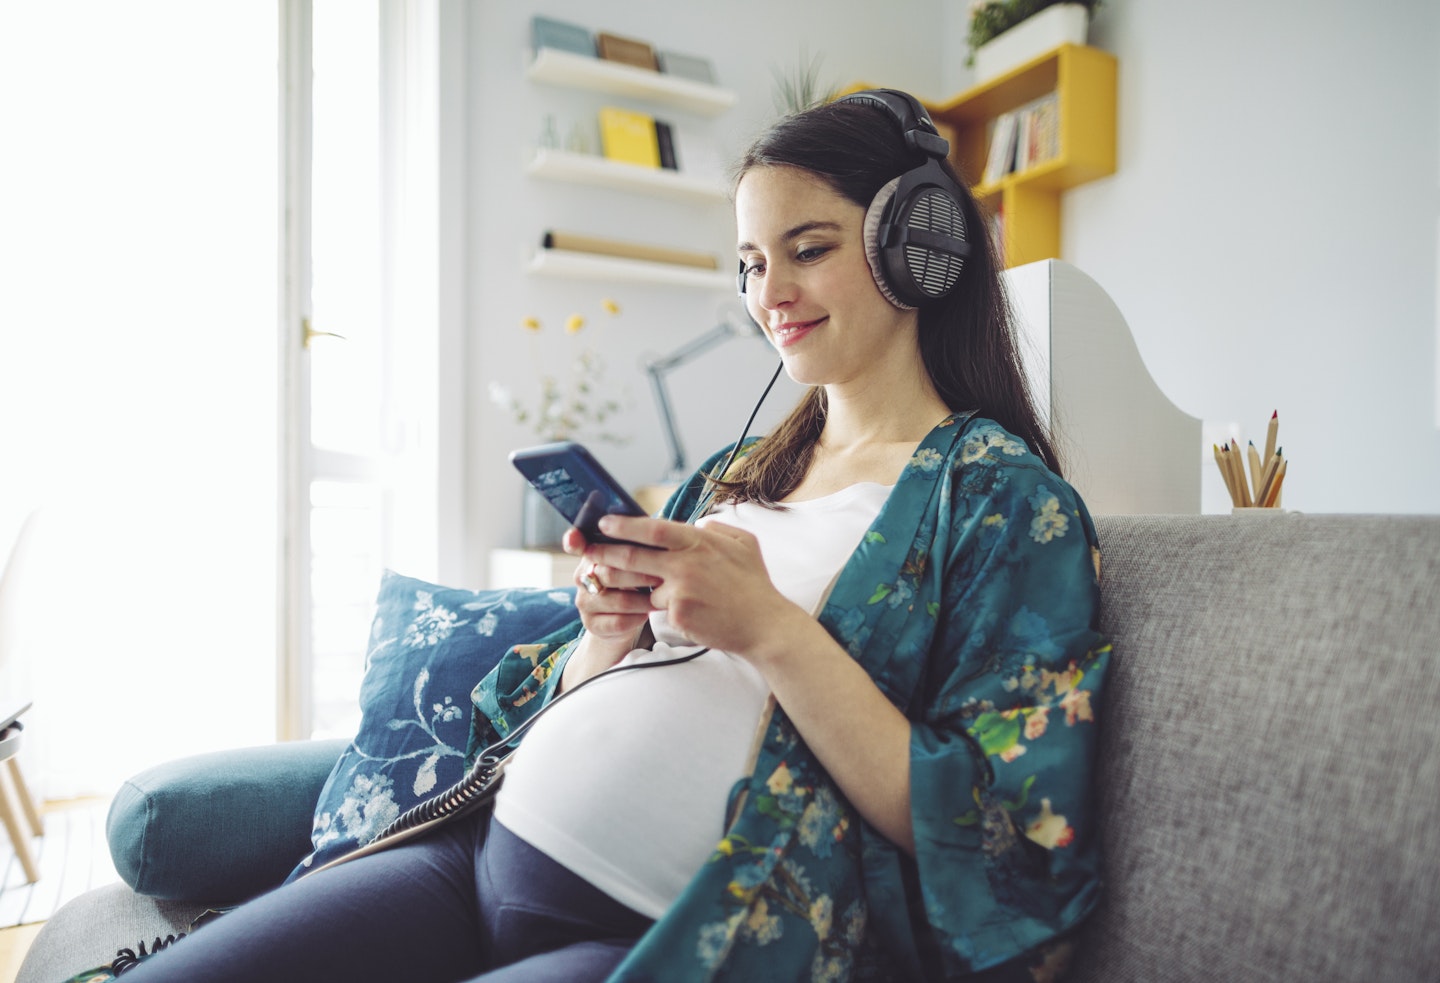 hypnobirthing podcasts and audiobooks